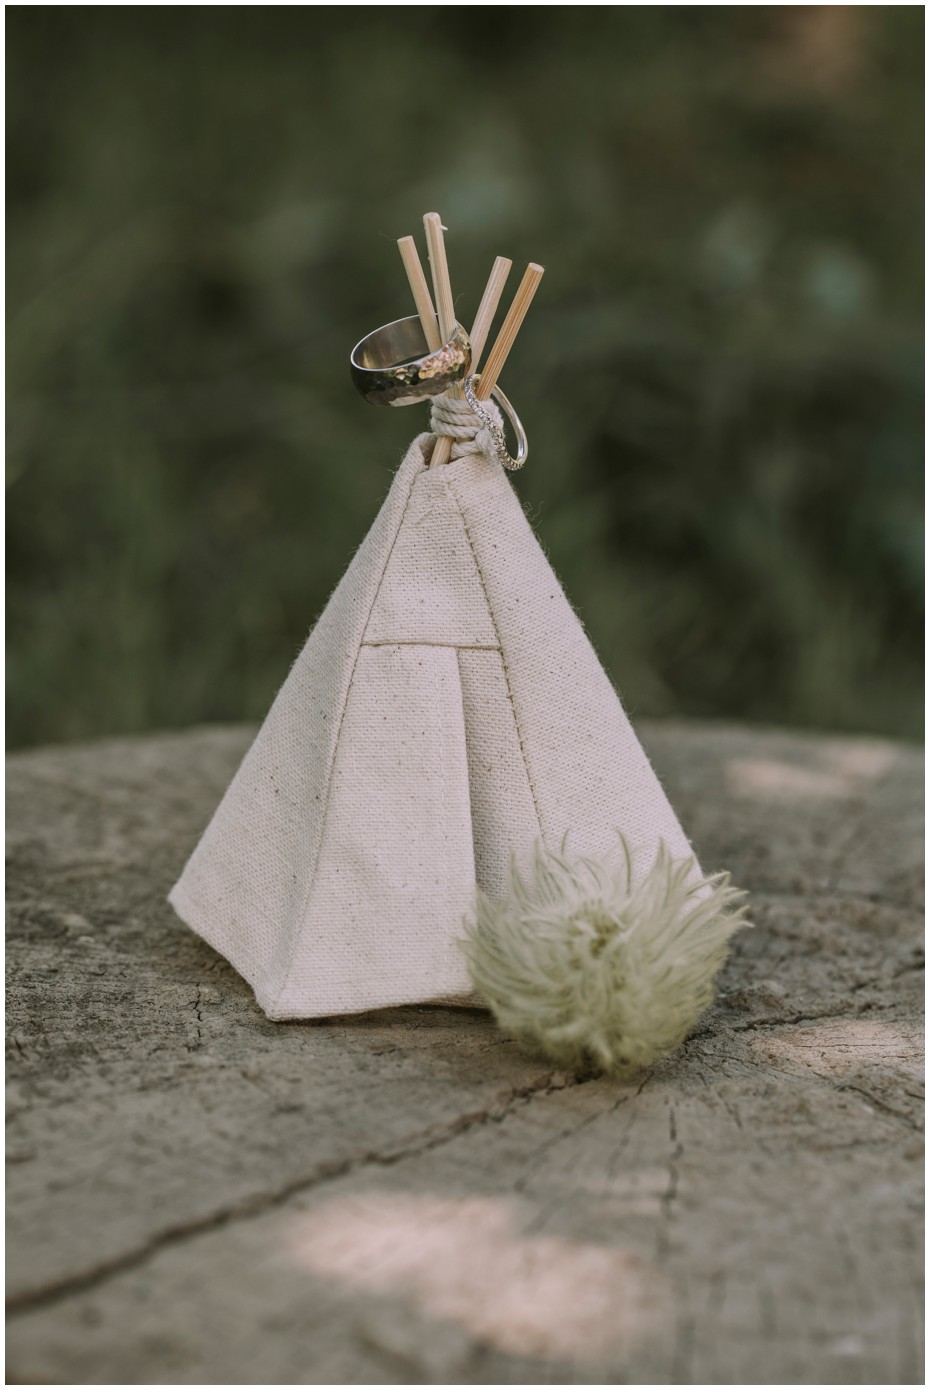 Charlotte Kiri Photography - Wedding Photography picture of a mini teepee with his and her wedding rings balanced on top of the wooden ends, in Wanaka, New Zealand